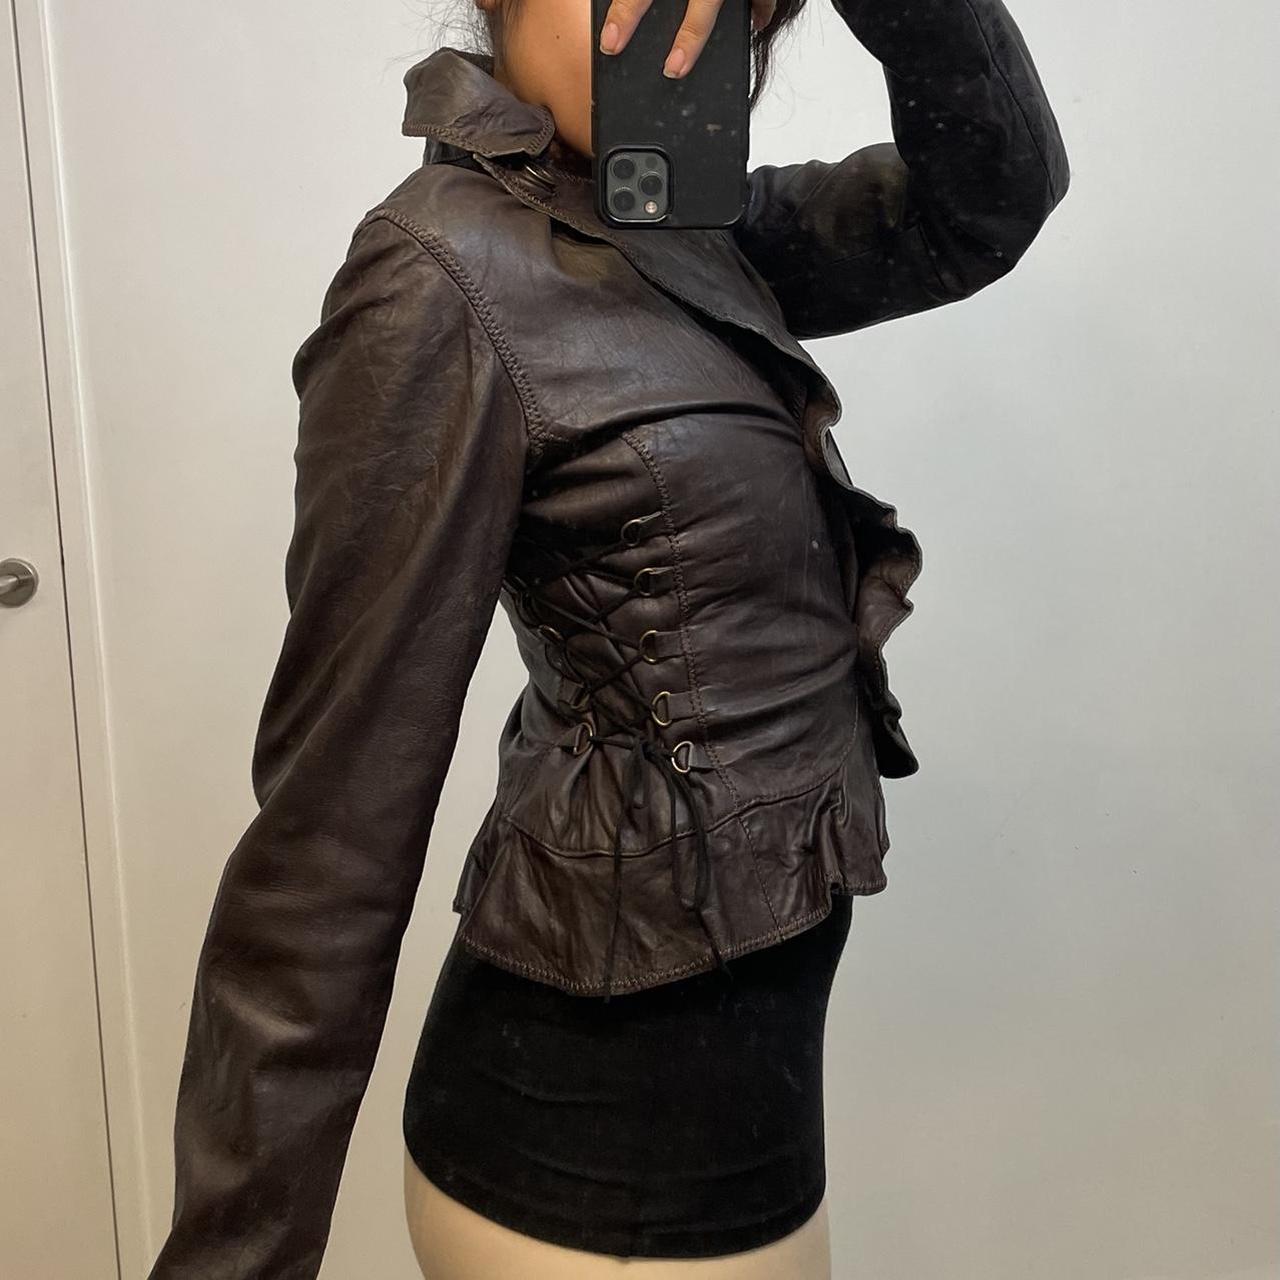 Unique sexy real leather jacket from Morgan Cropped... - Depop